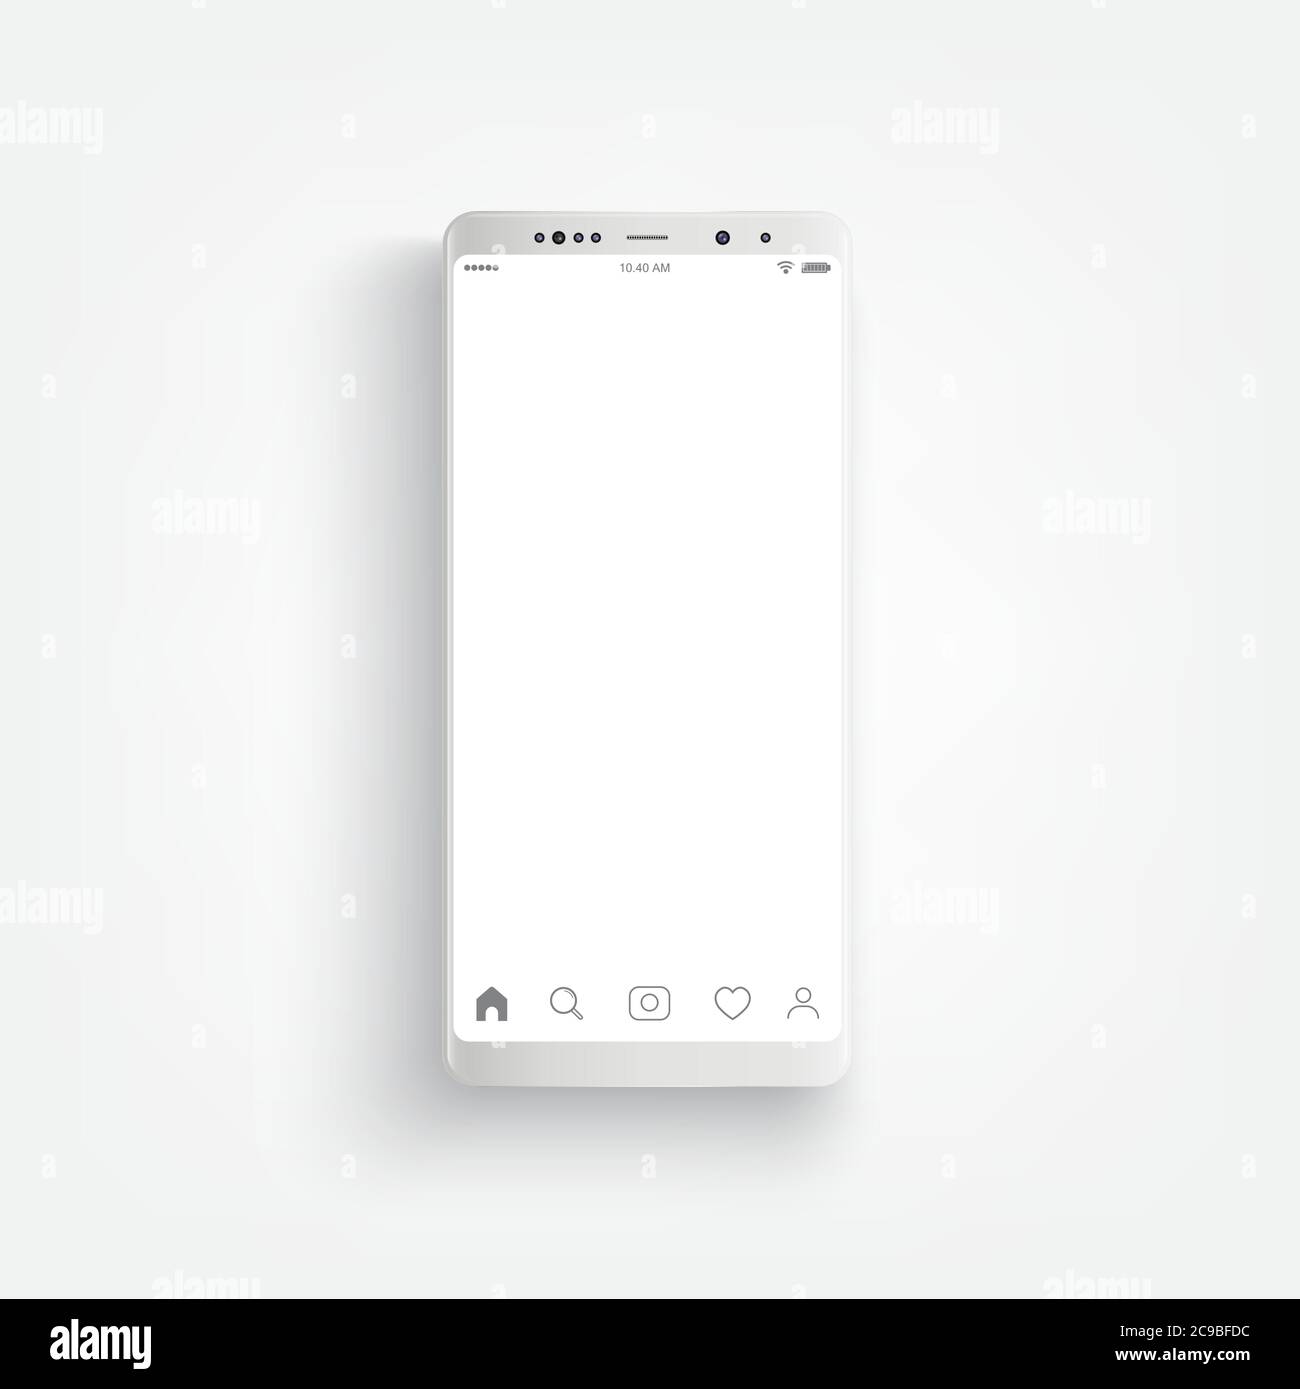 modern realistic white smartphone smartphone with edge side style 3d vector illustration of cell phone 2C9BFDC